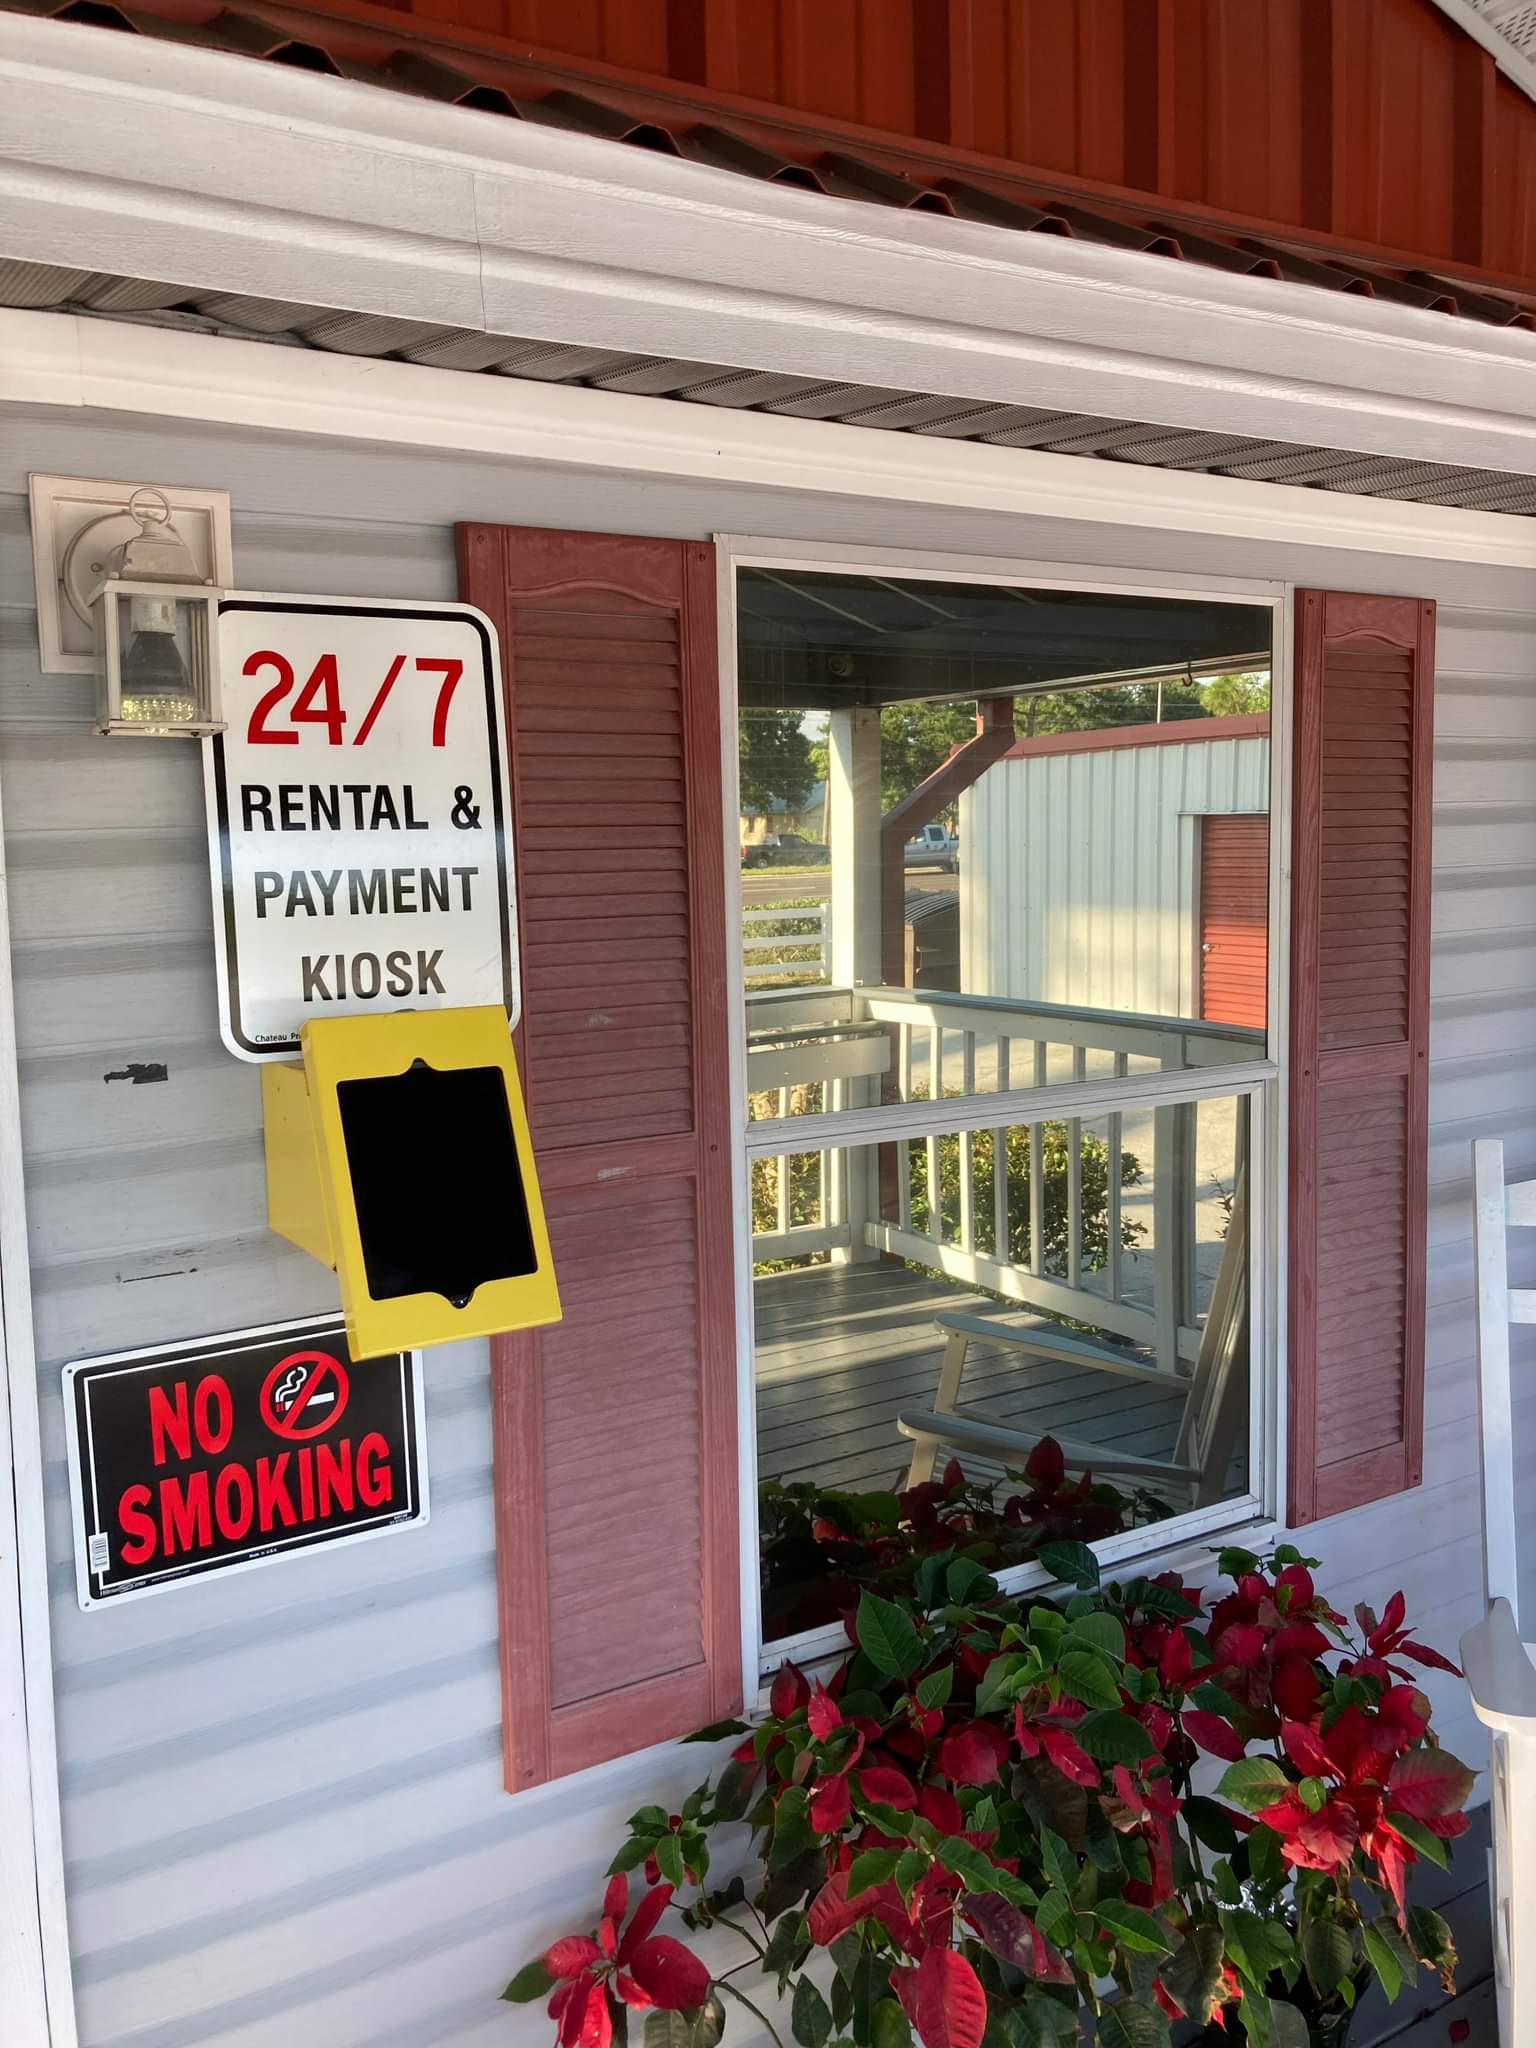 Kiosk to rent and pay